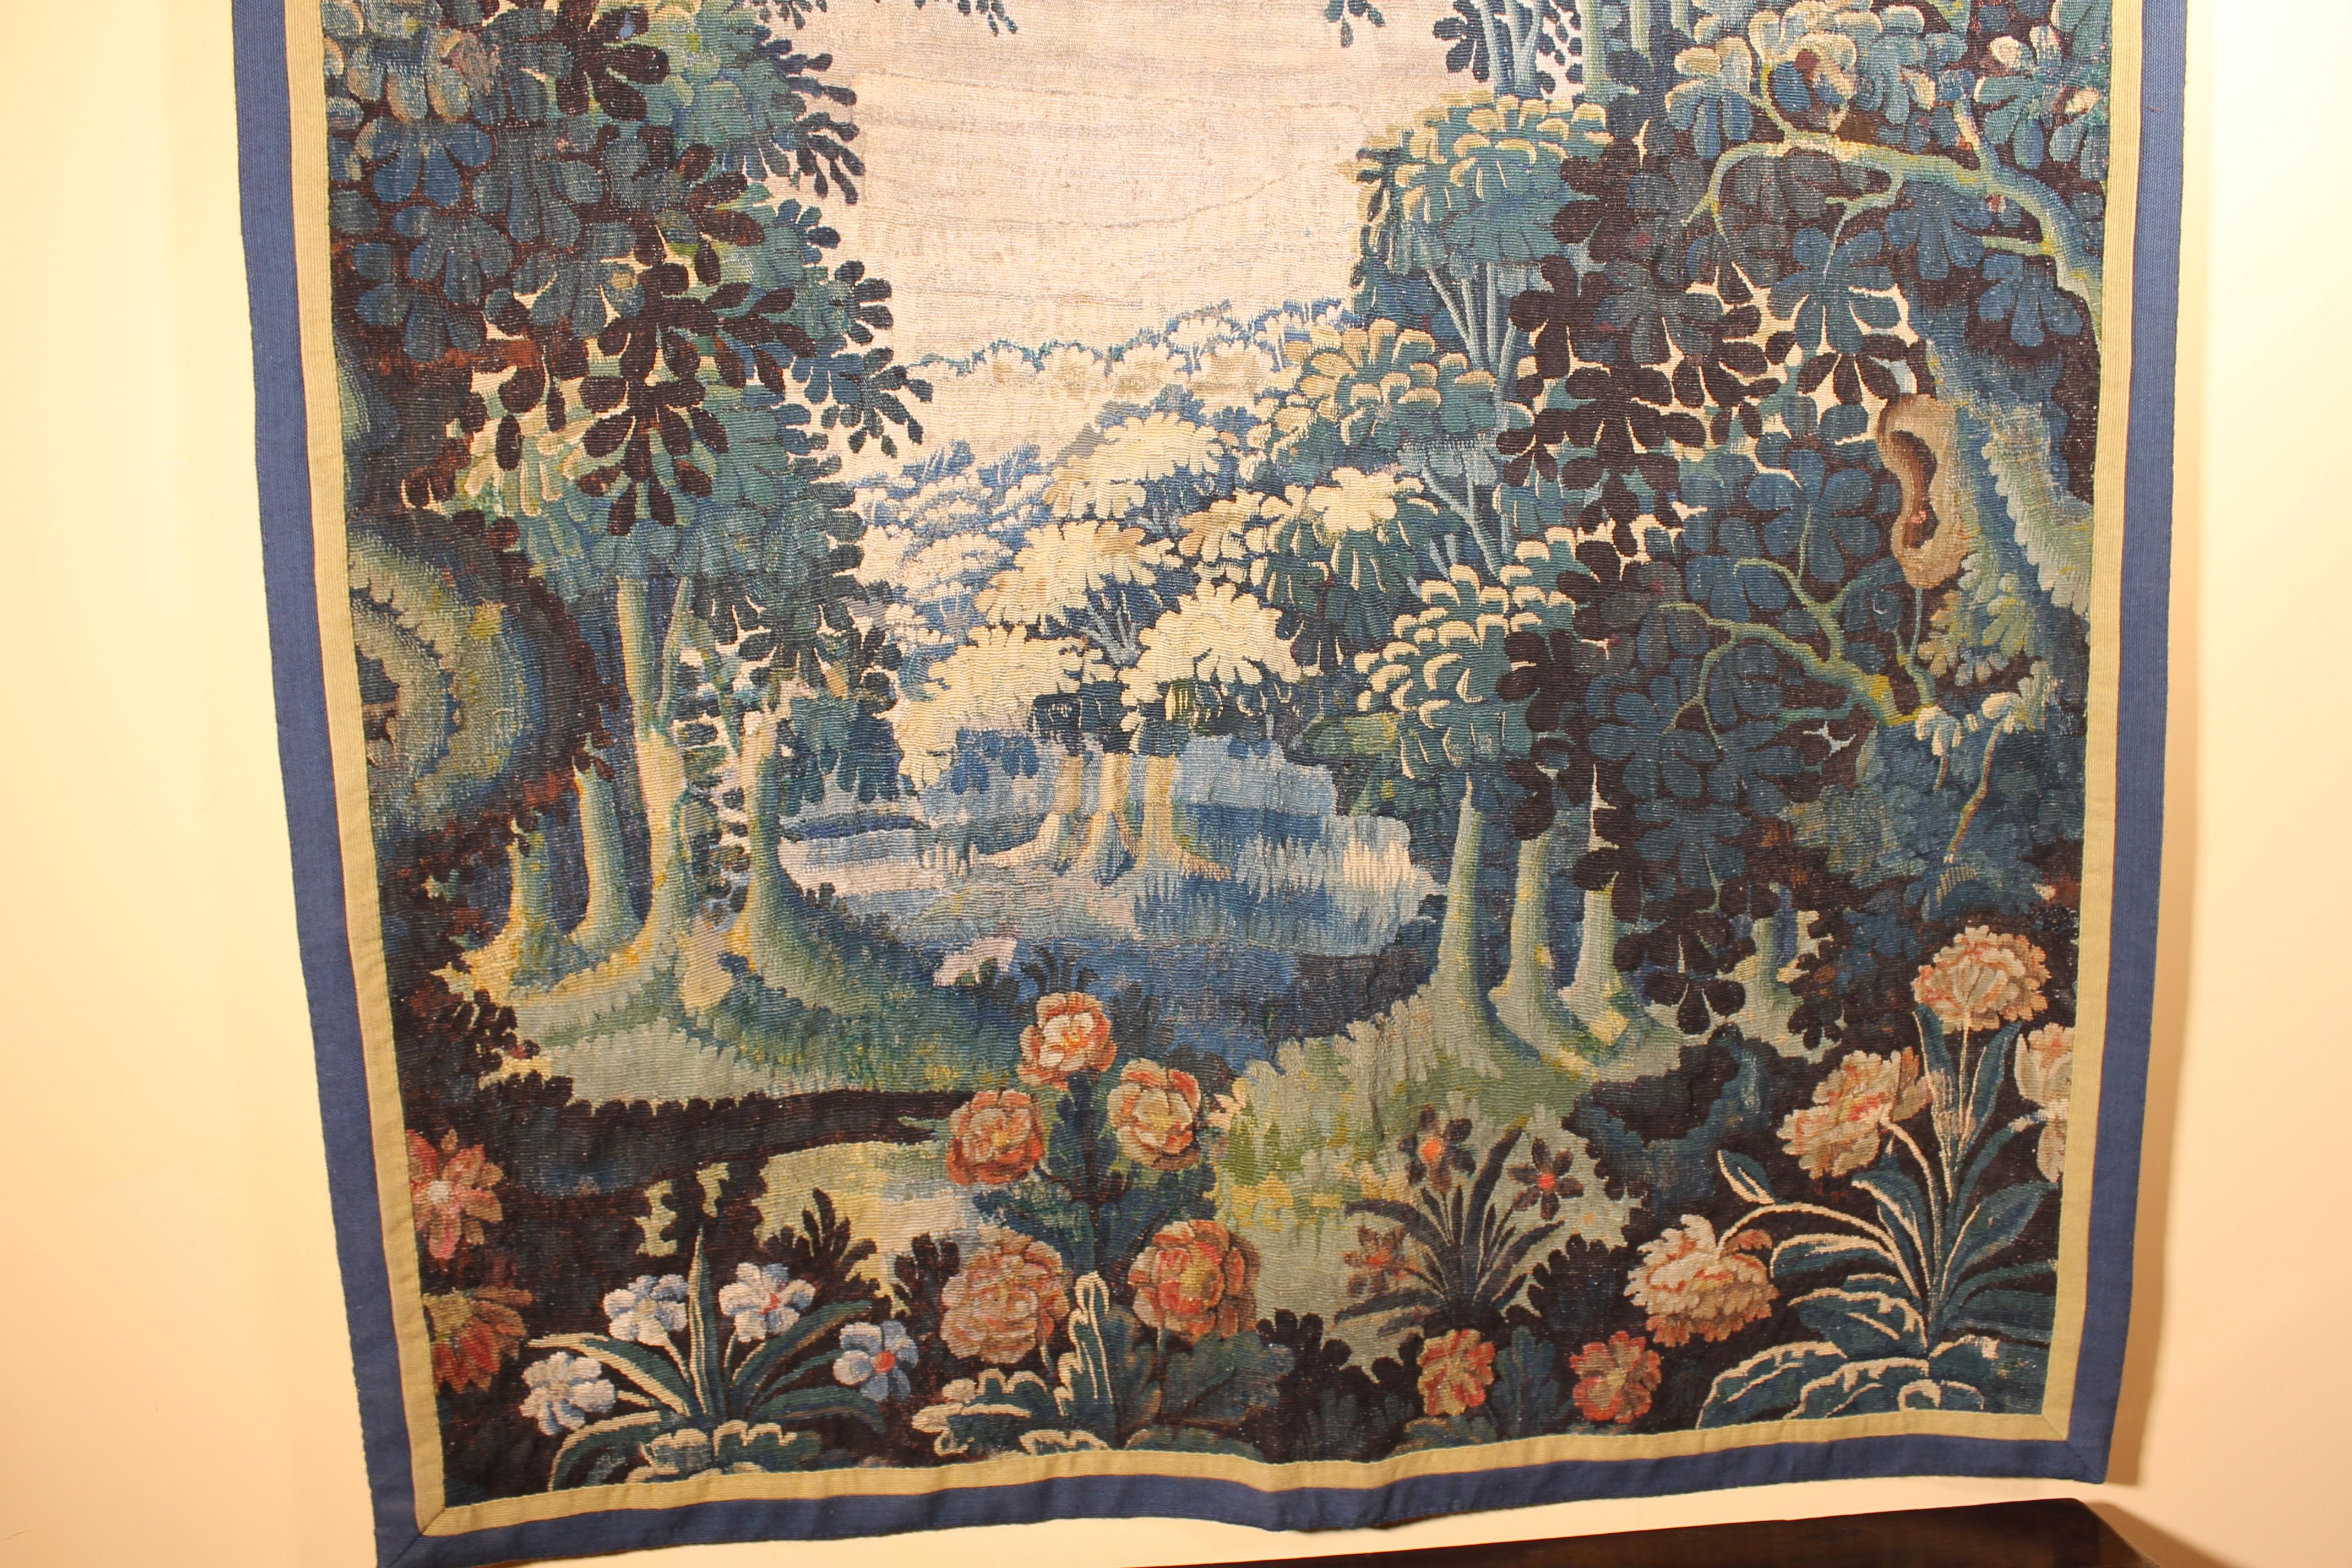 Large Flemish Verdure Tapestry from Audenarde panel dating circa 1680 

This fine tapistry depicting a beautiful verdure scene with fine and beautiful colors. Interesting use of perspective in this tapestry 

The composition and the fresh